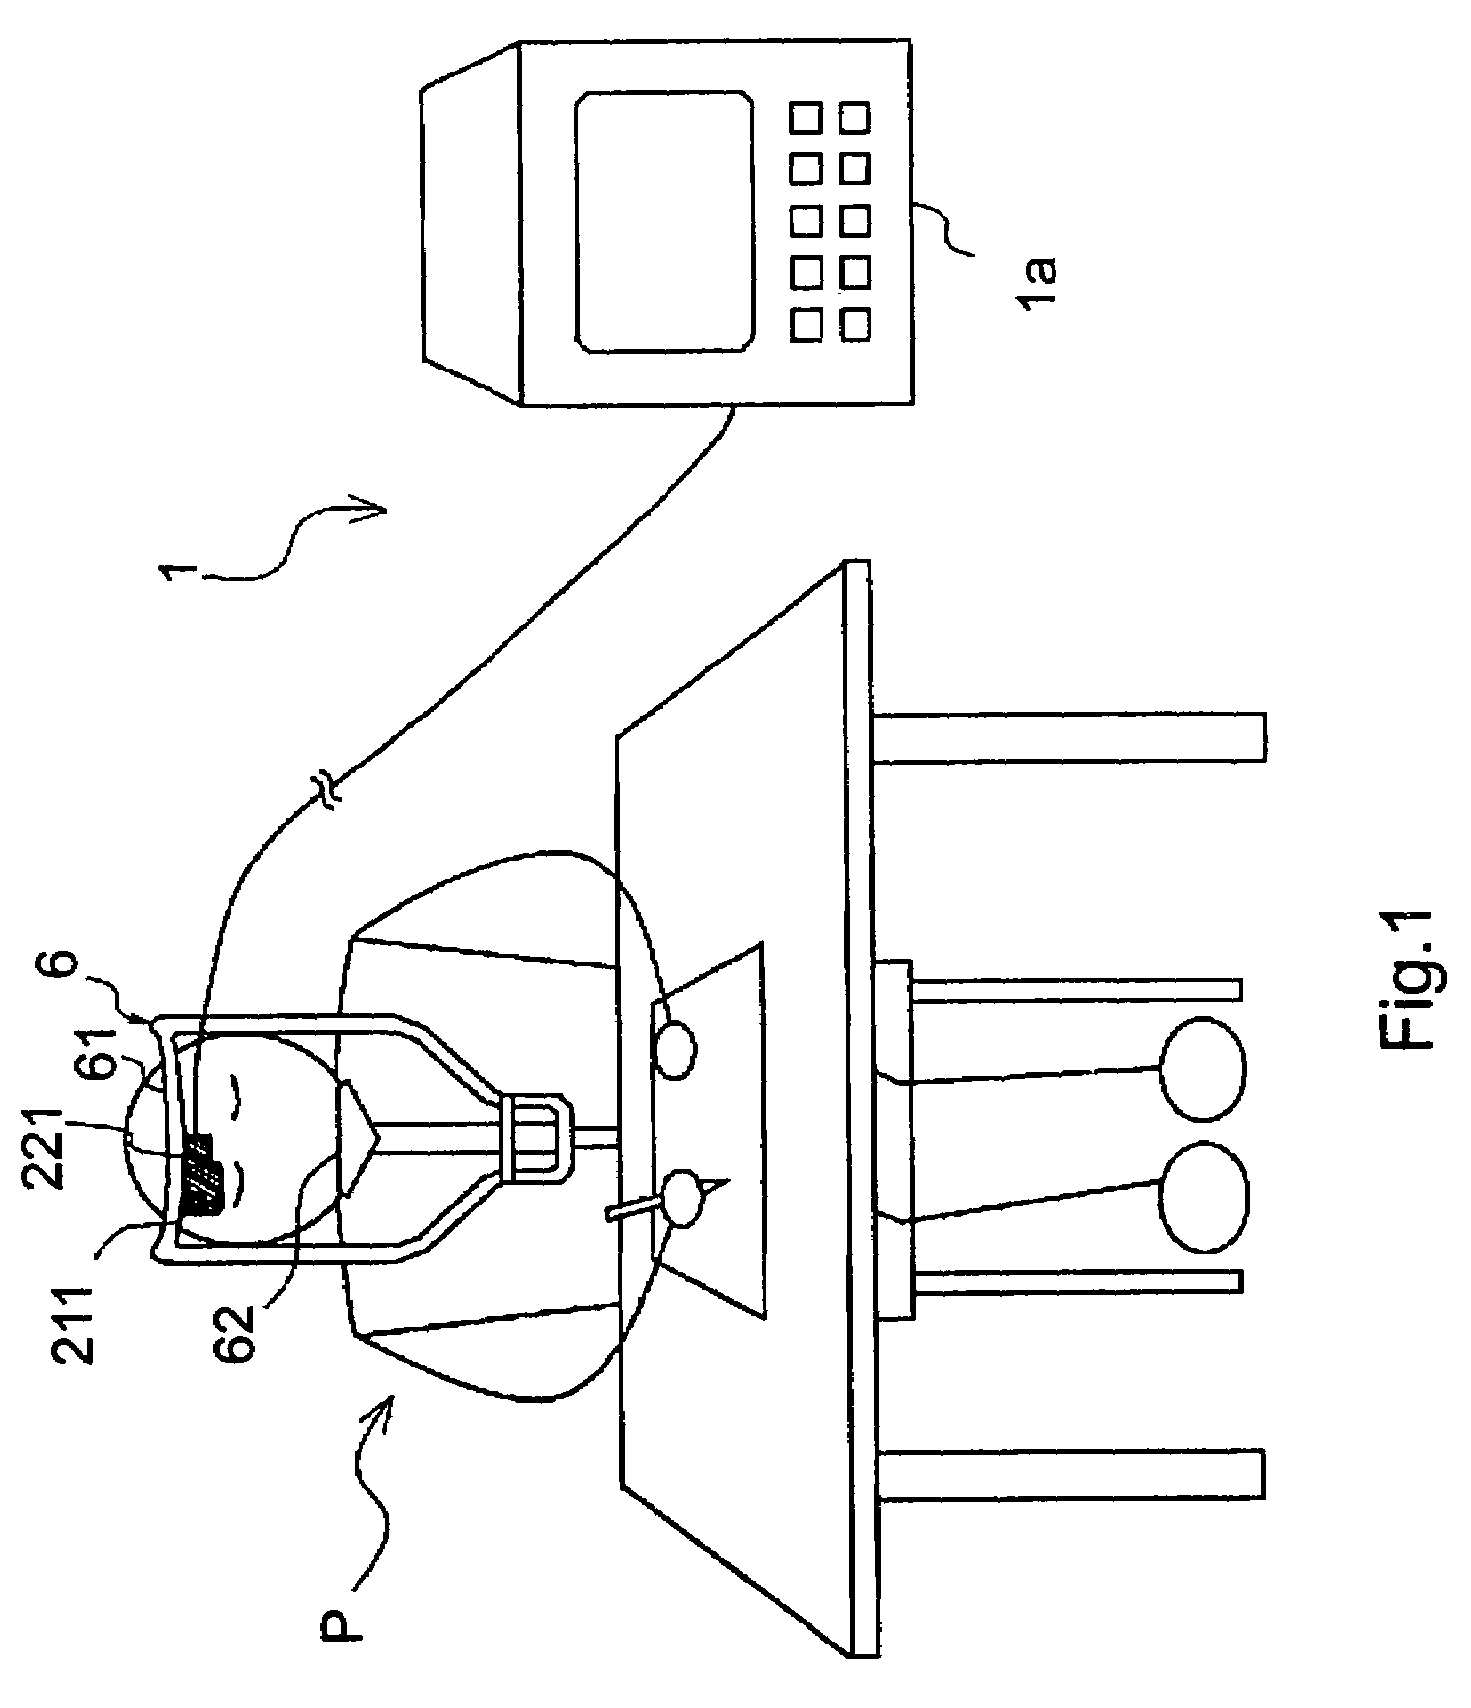 Psychological state assessment device, psychological state assessment method